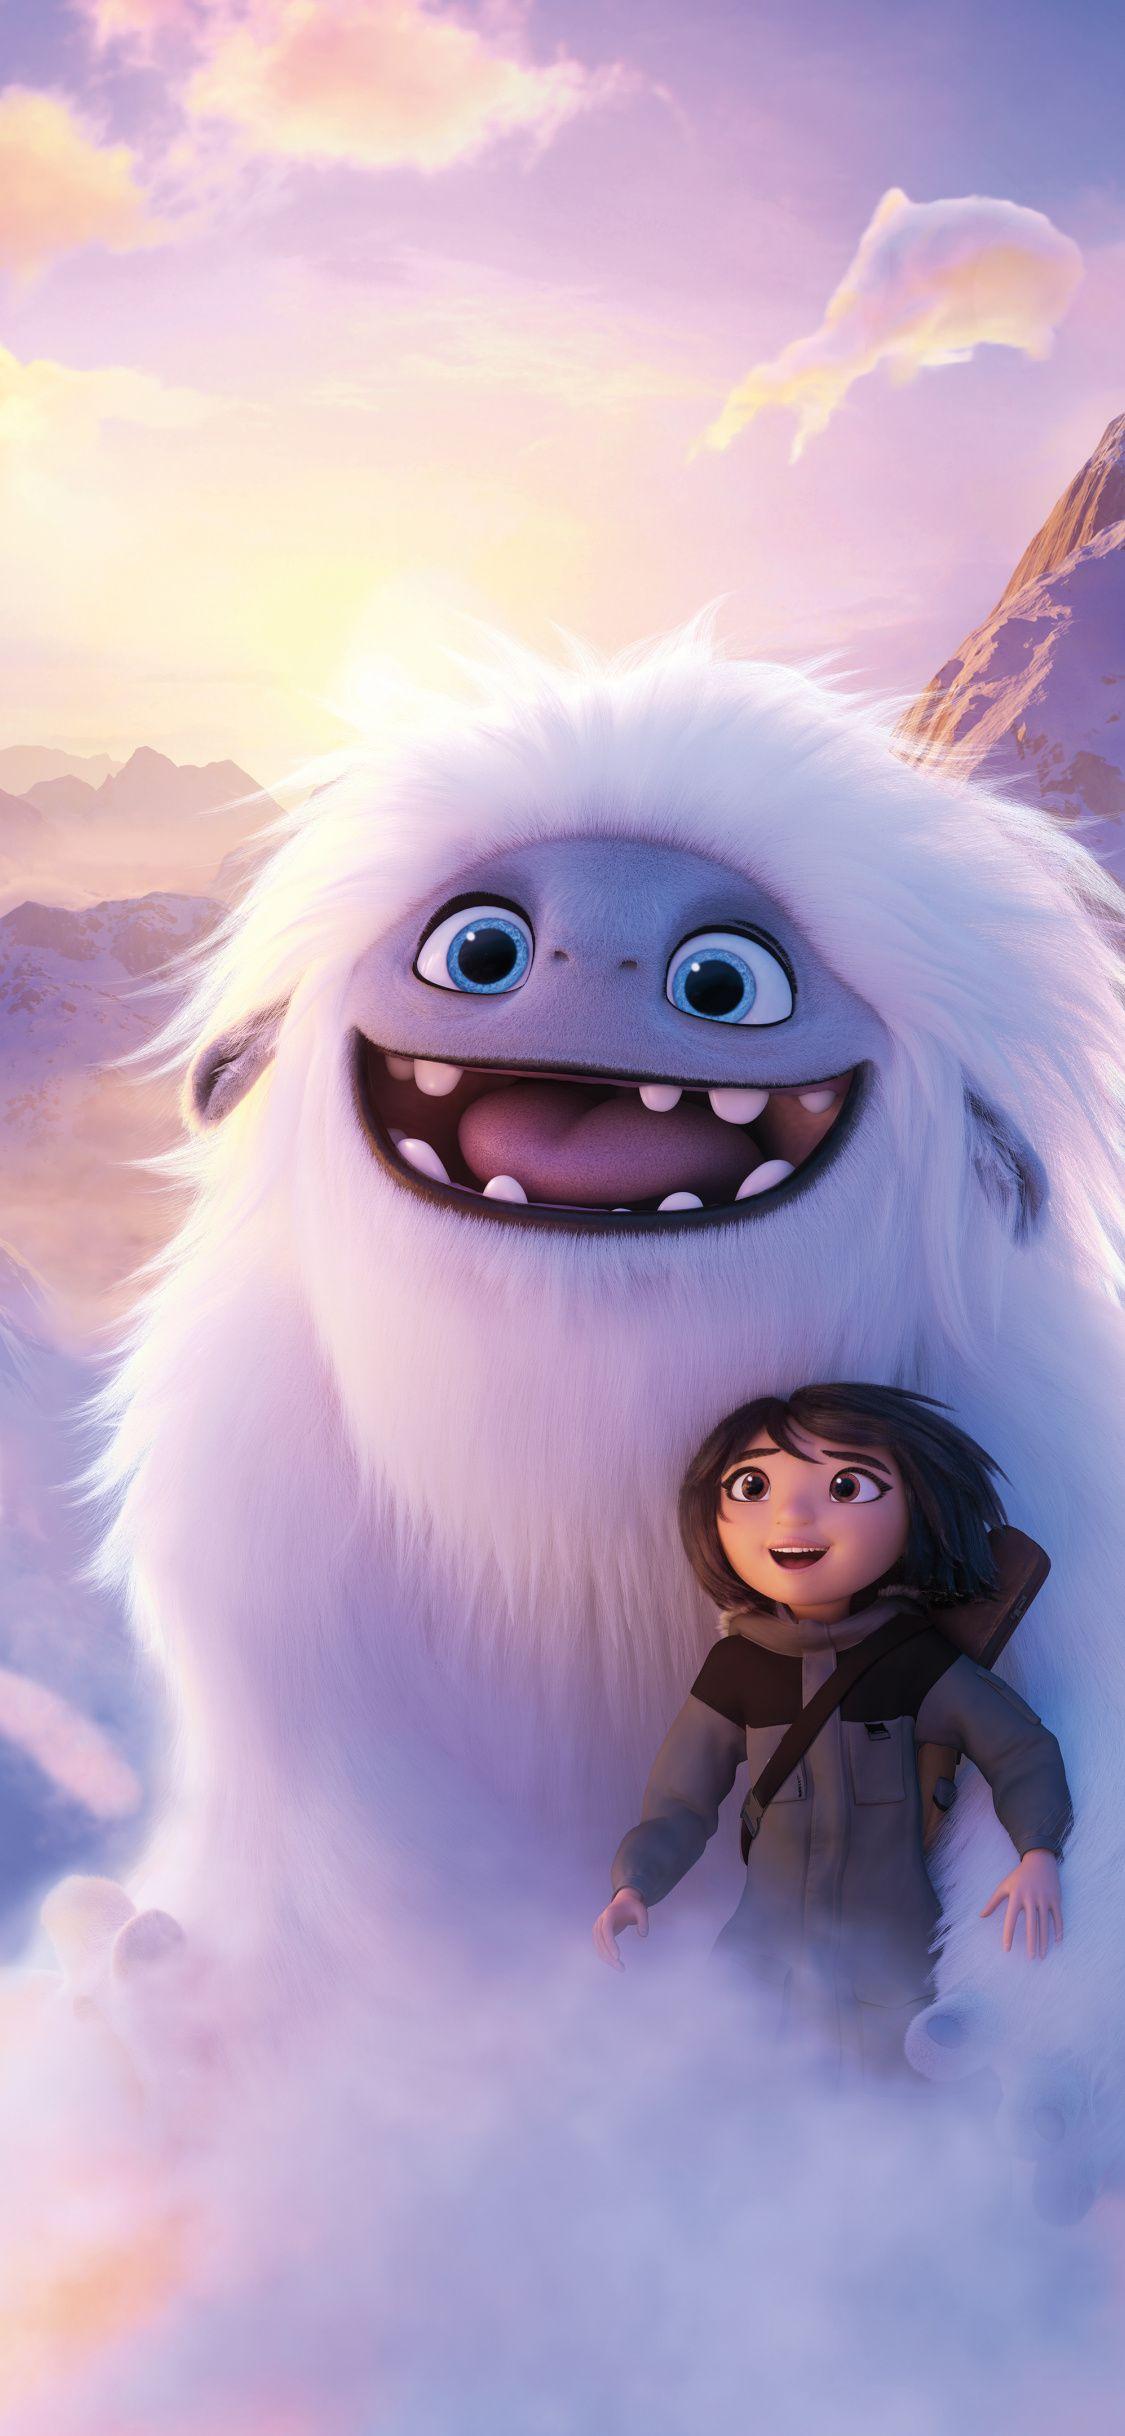 Abominable, yeti and boy, clouds, flight, 2019 movie